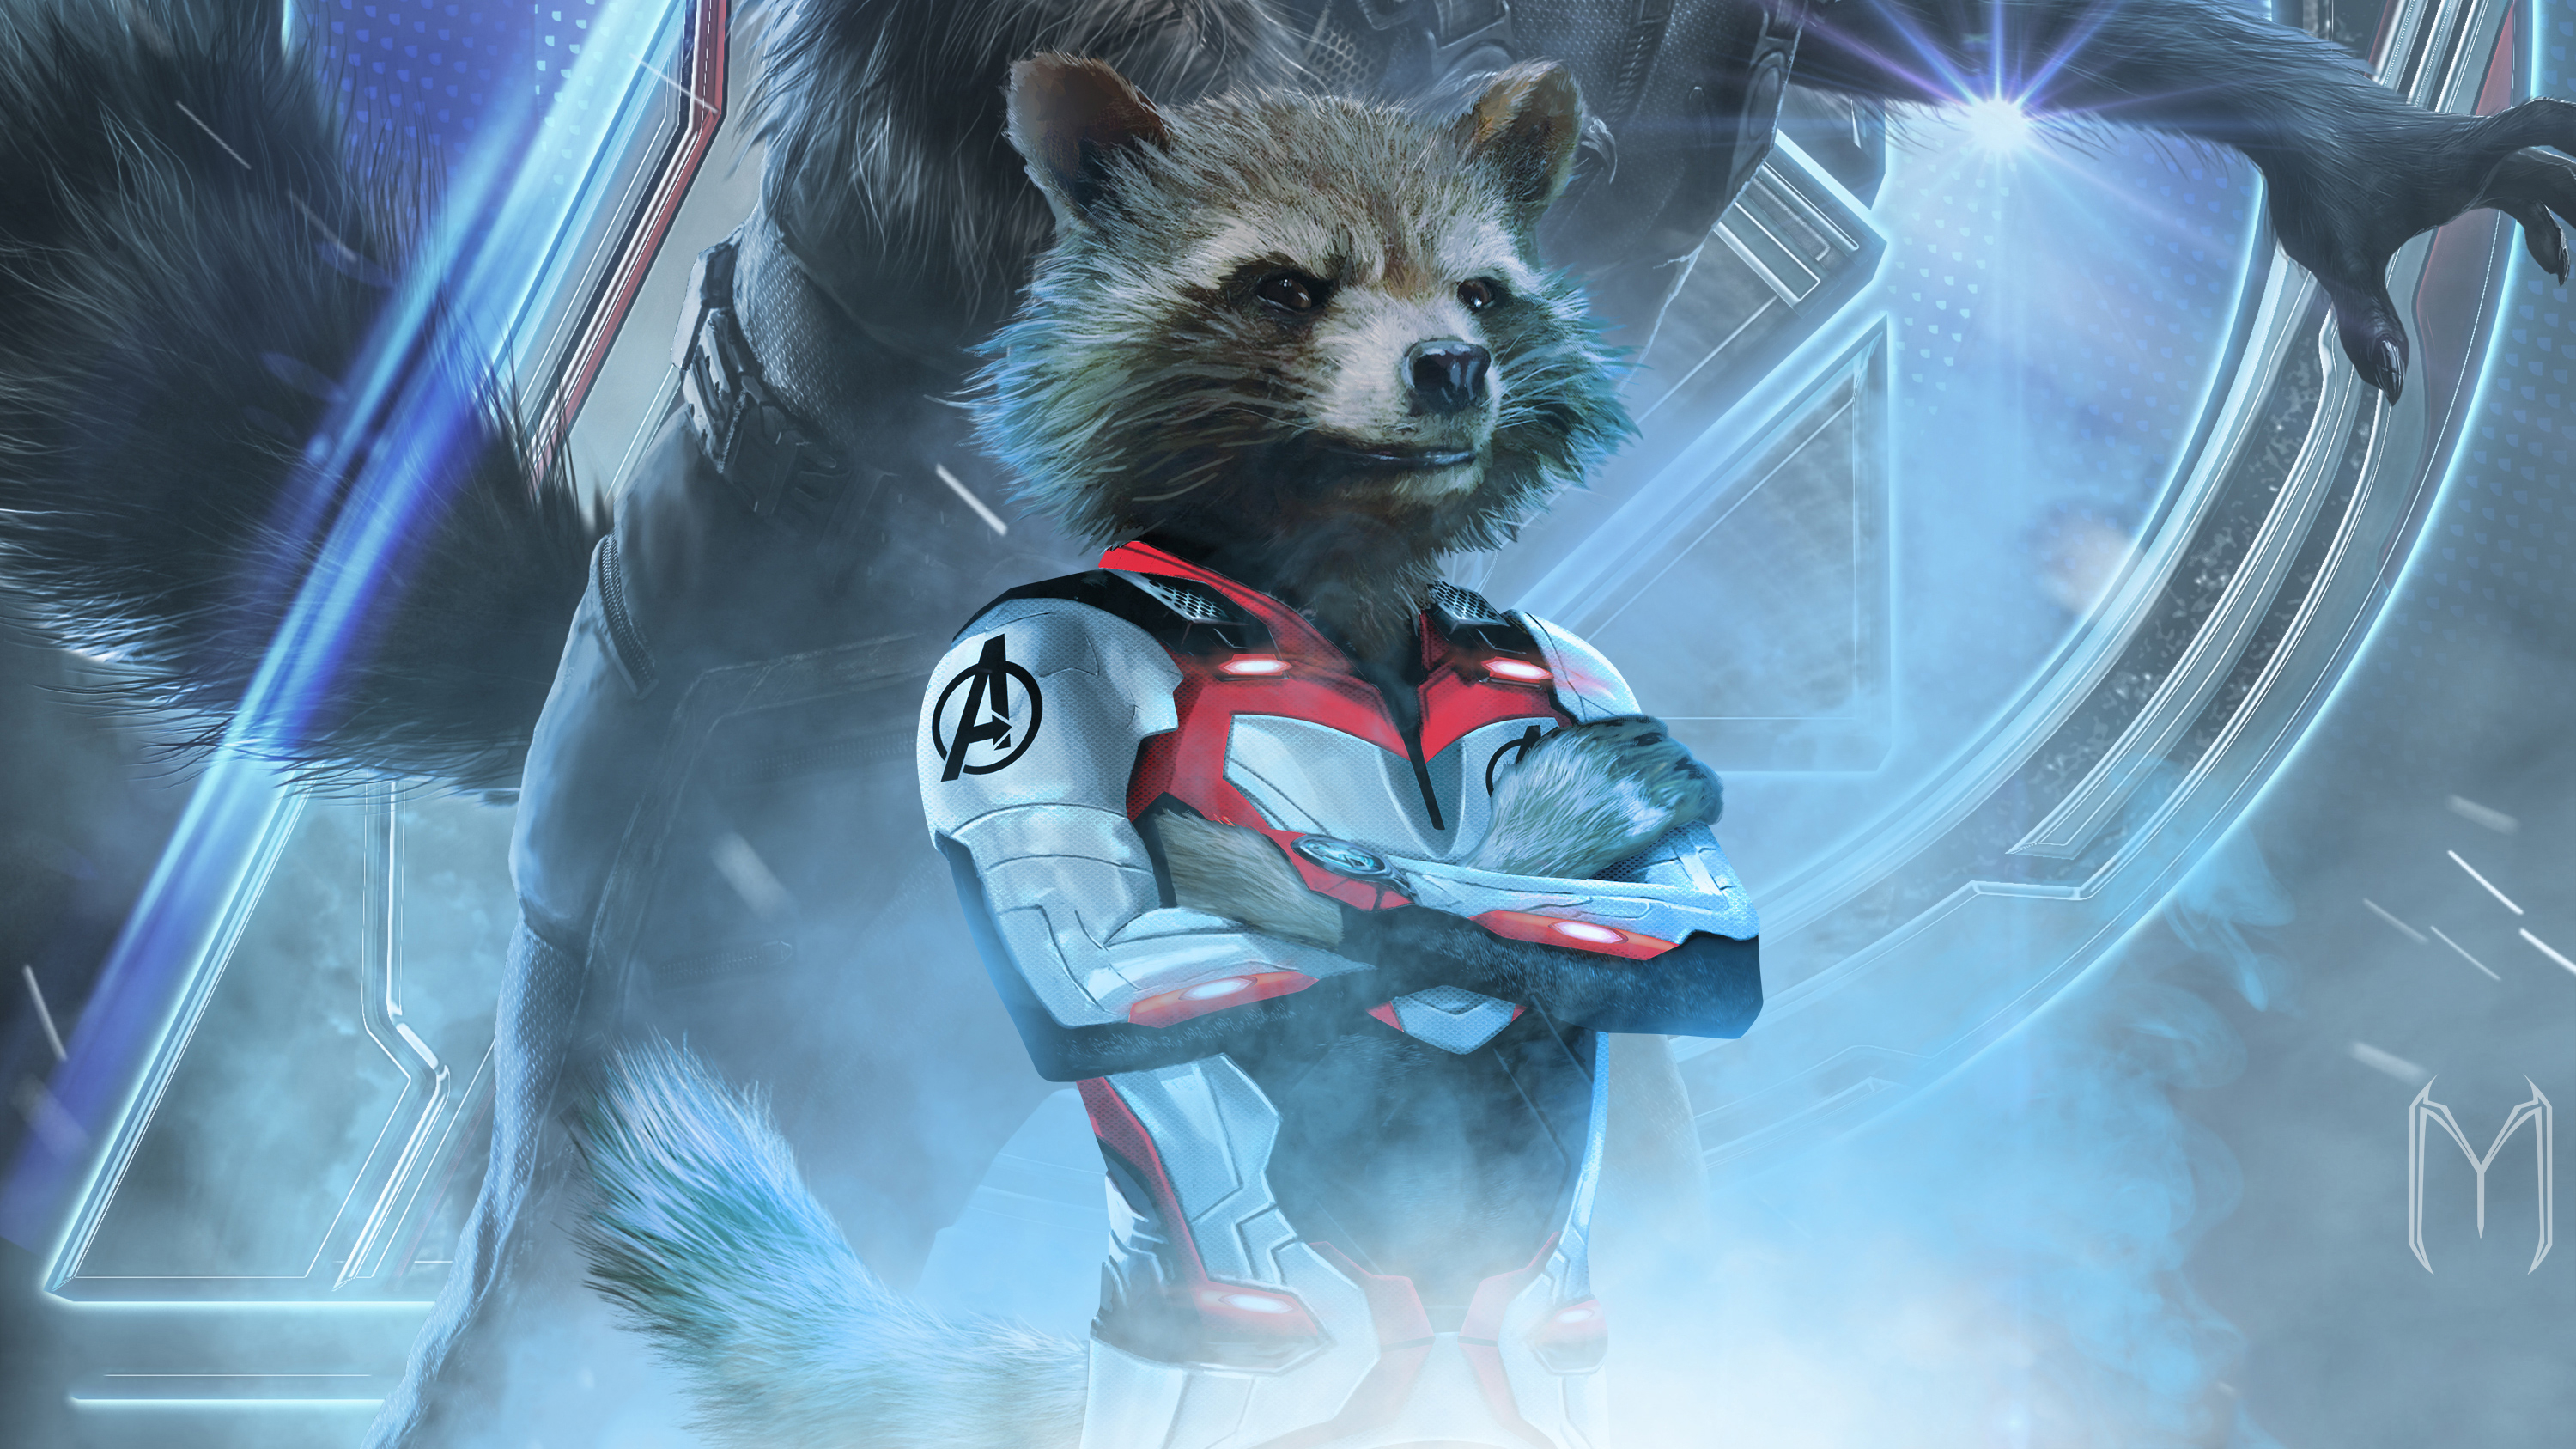 3000x1687 Rocket Raccoon In Avengers Endgame 2019, HD Movies, 4k Wallpapers, Images, Backgrounds, Photos and Pictures